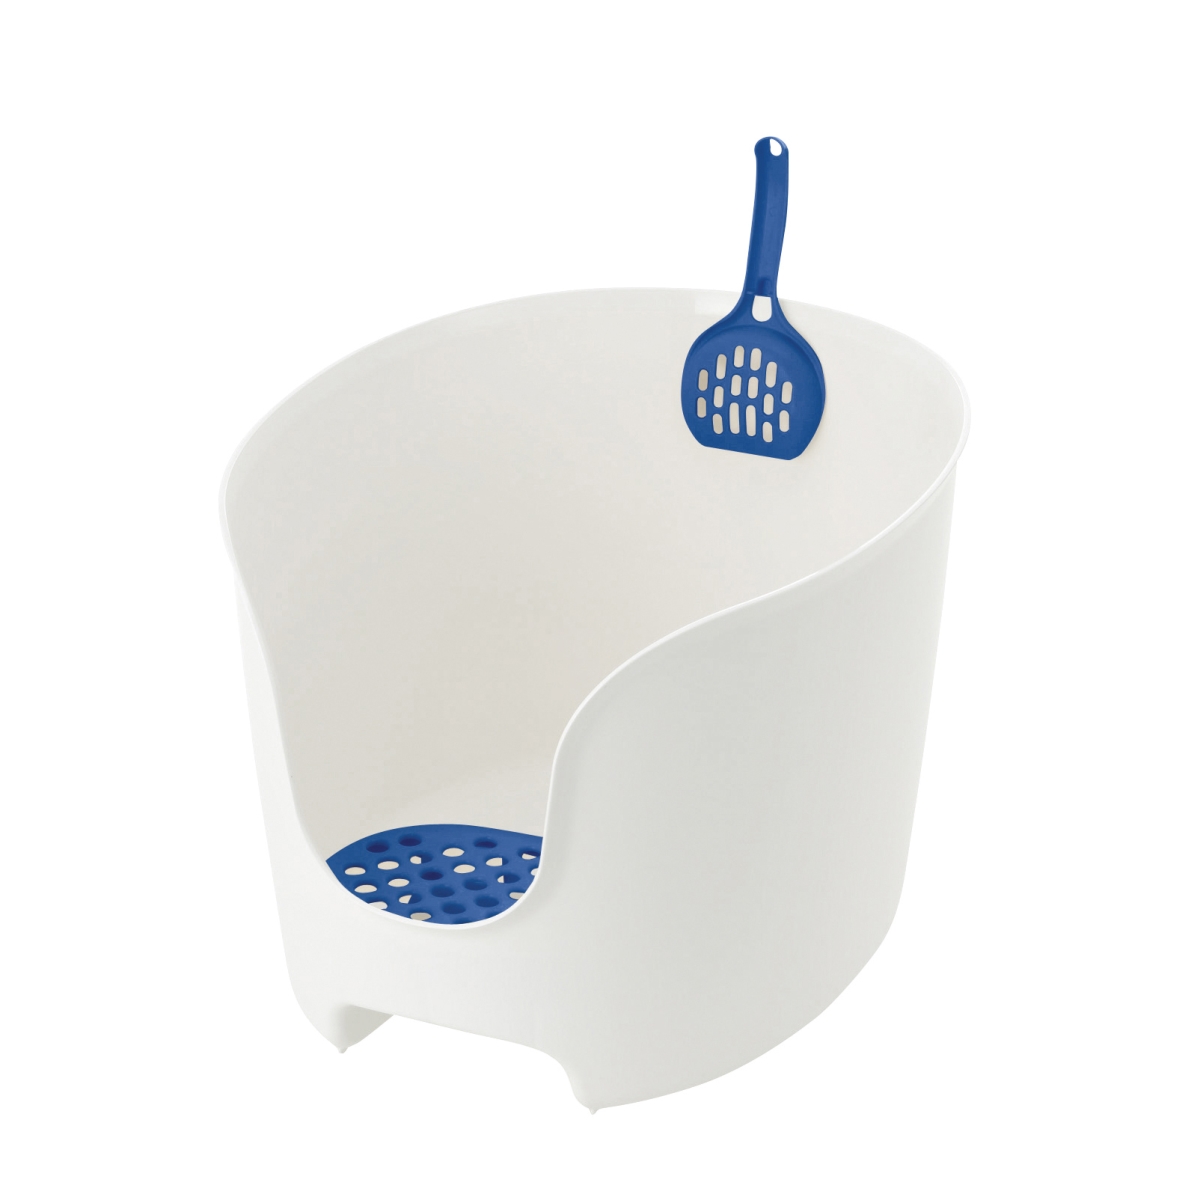 Picture of Richell 60020 Richell 60020 PAW TRAX High Wall Cat Litter Box - White/Blue